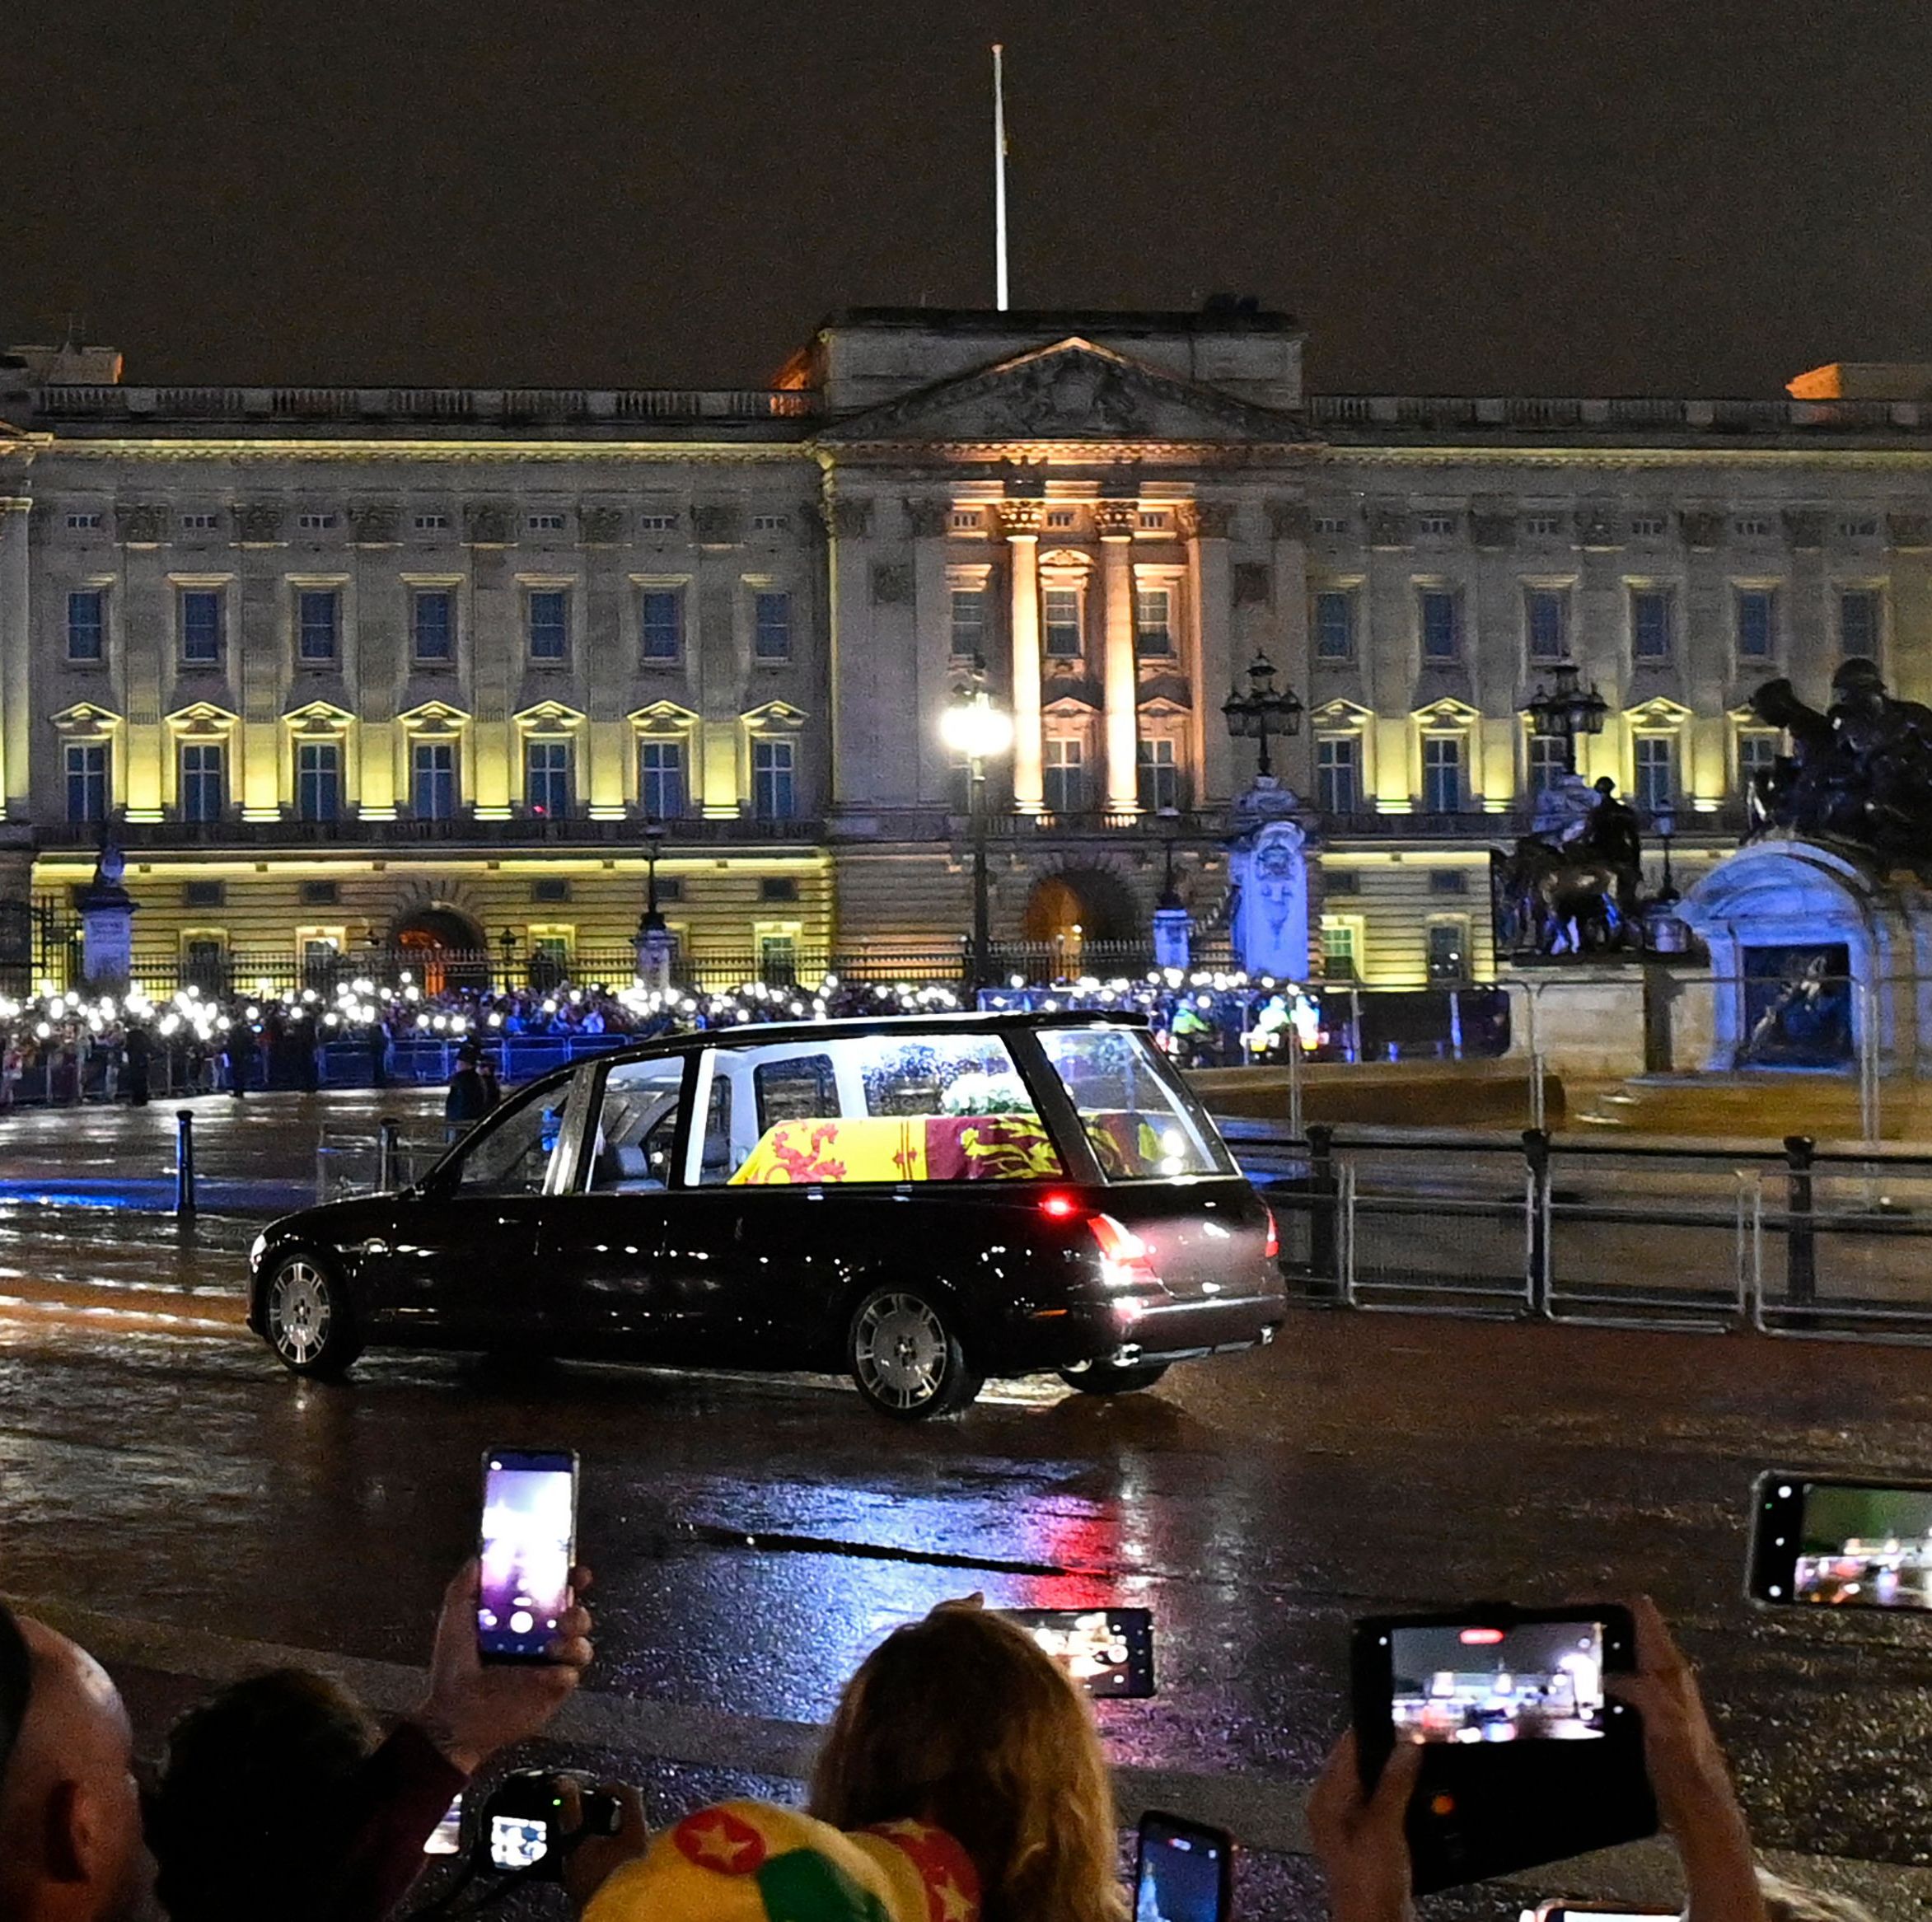 Queen Elizabeth Makes One Final Trip Home to Buckingham Palace